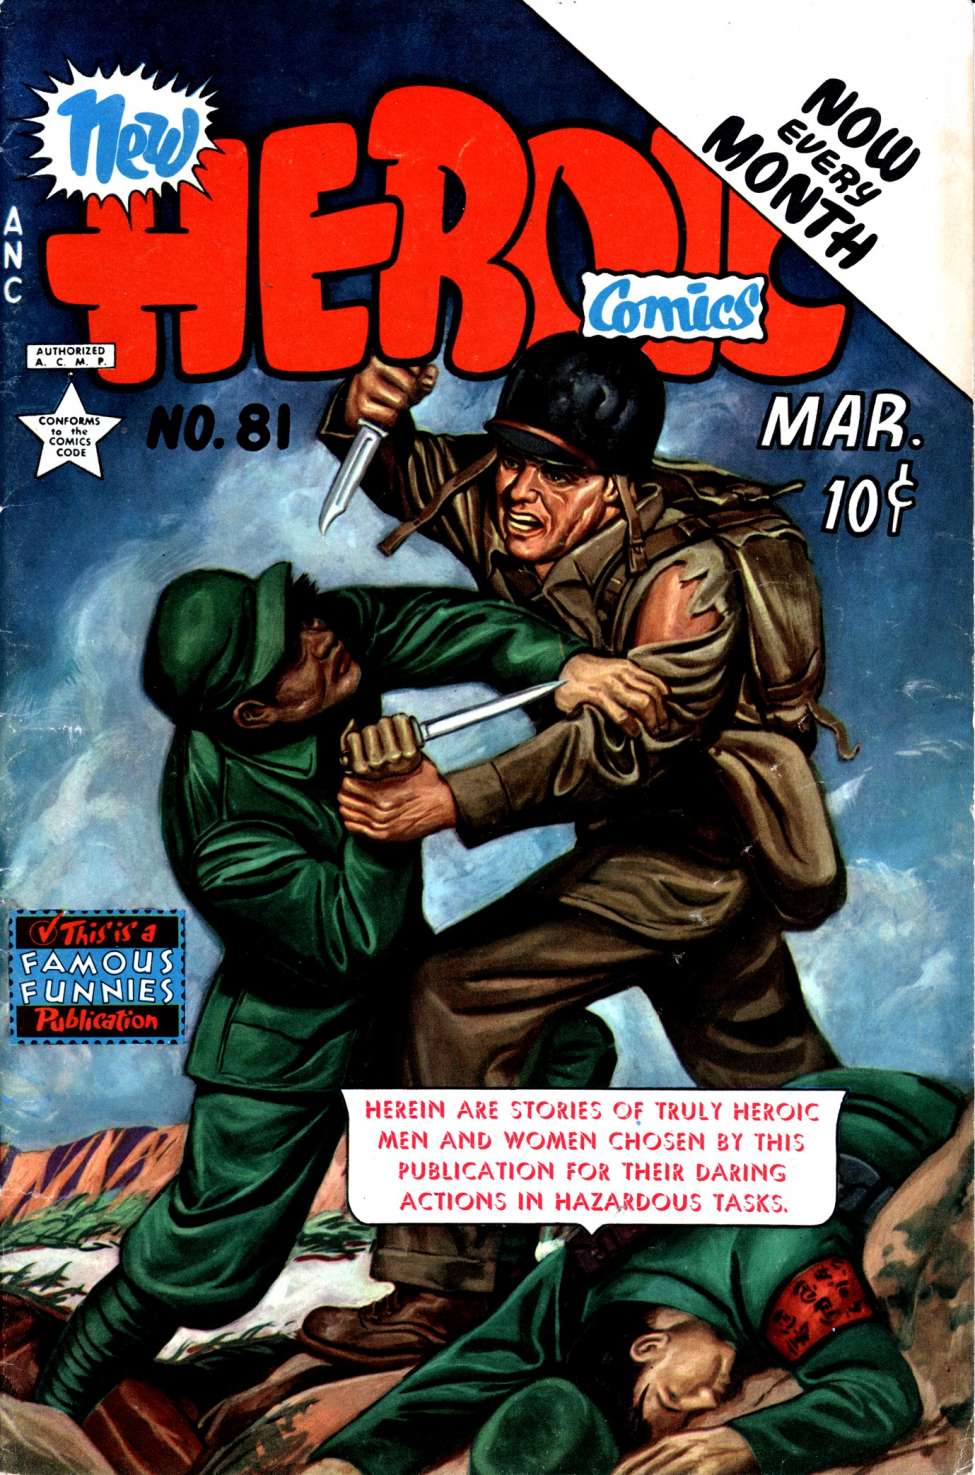 Book Cover For New Heroic Comics 81